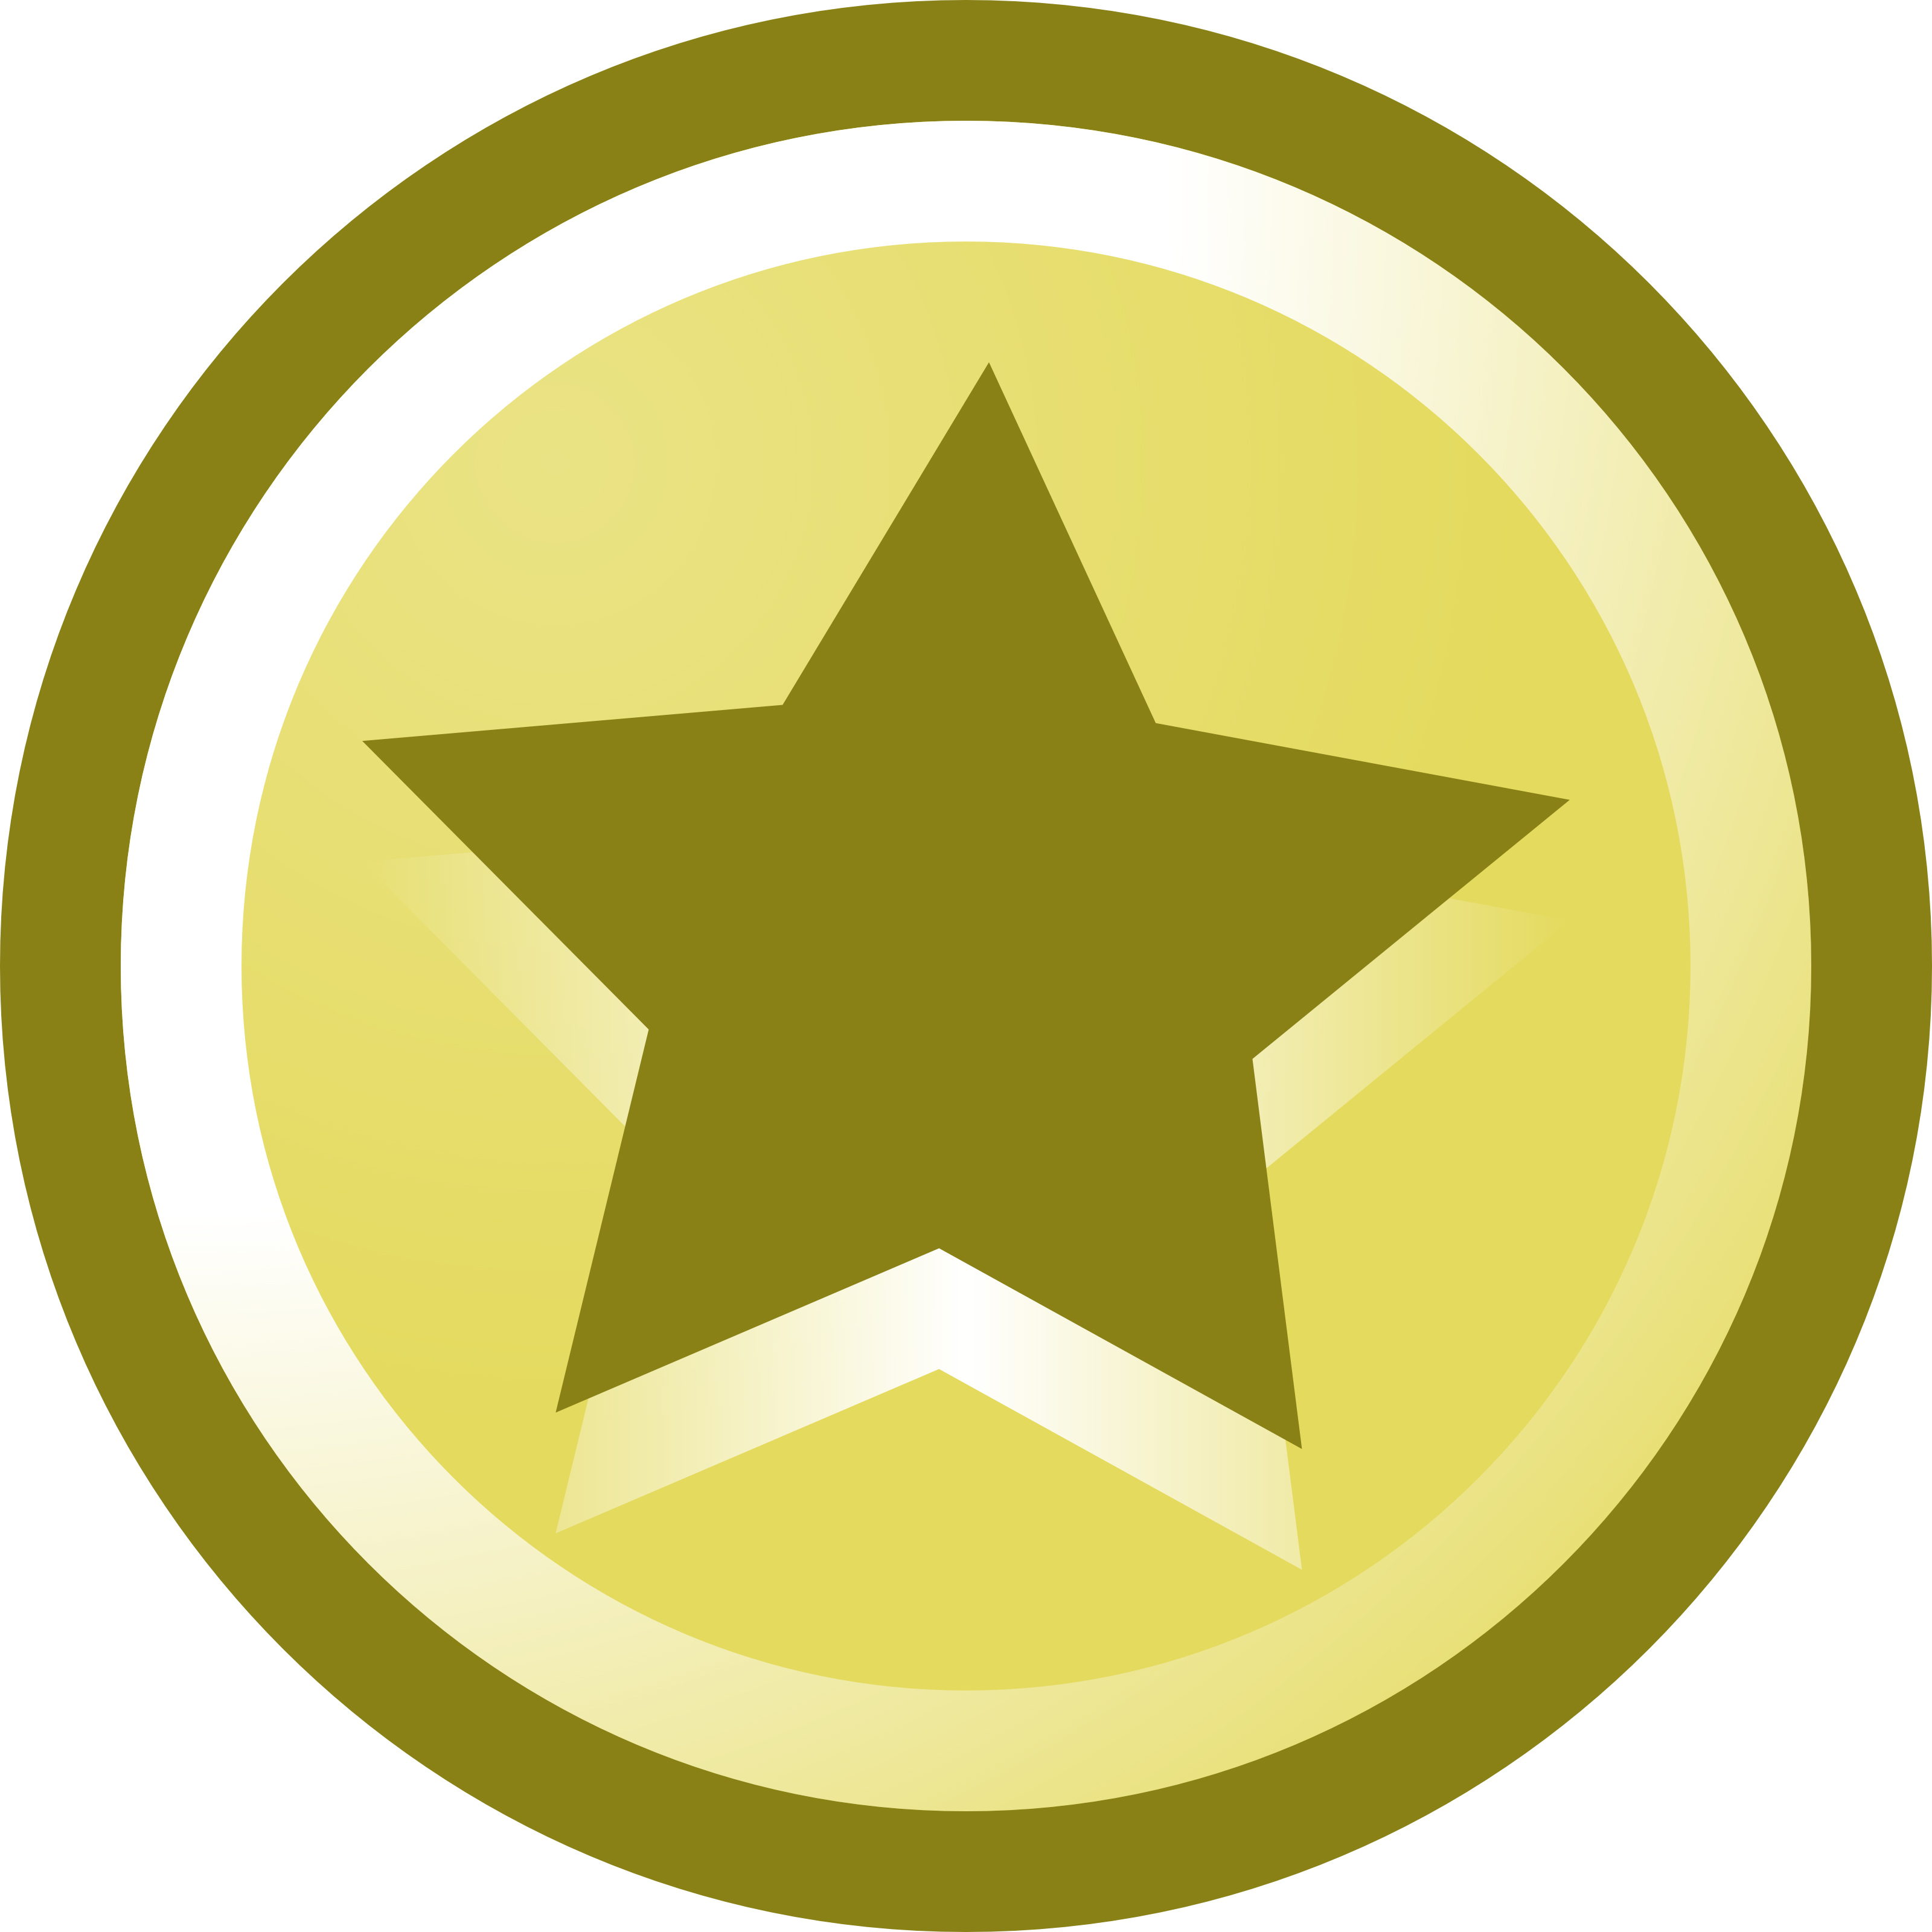 Download Free Vector Illustration Of A Star Icon